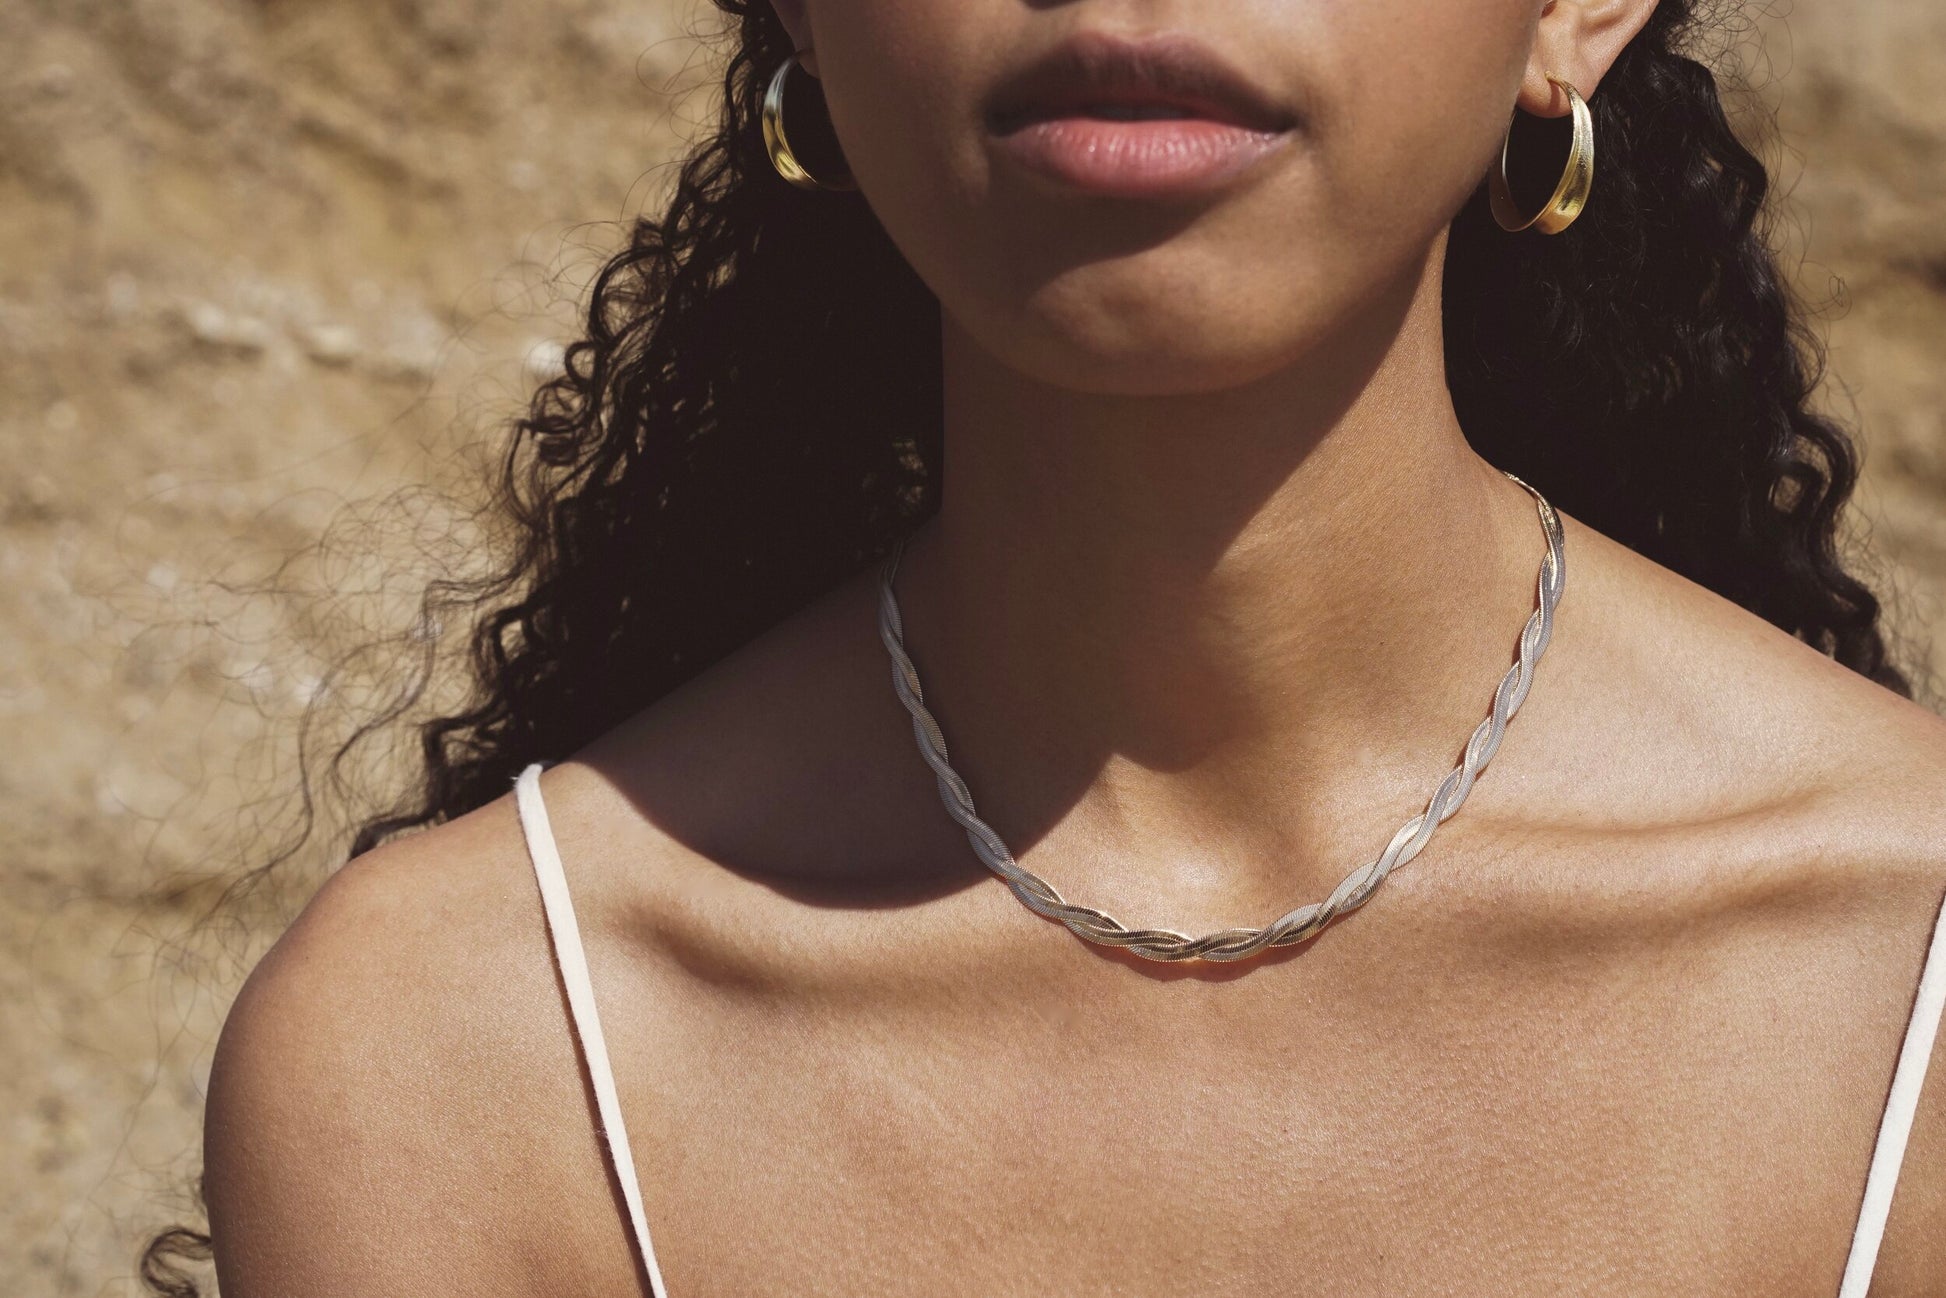 Kalia Necklace by Mountainside Jewelry. A dramatic flat textured twisted chain necklace with fine braided detail - an elegant addition to any style, designed to be dainty and delicate as well as bold and fierce, this piece was crafted by hand with love and care. Handmade in the Santa Cruz Mountains.